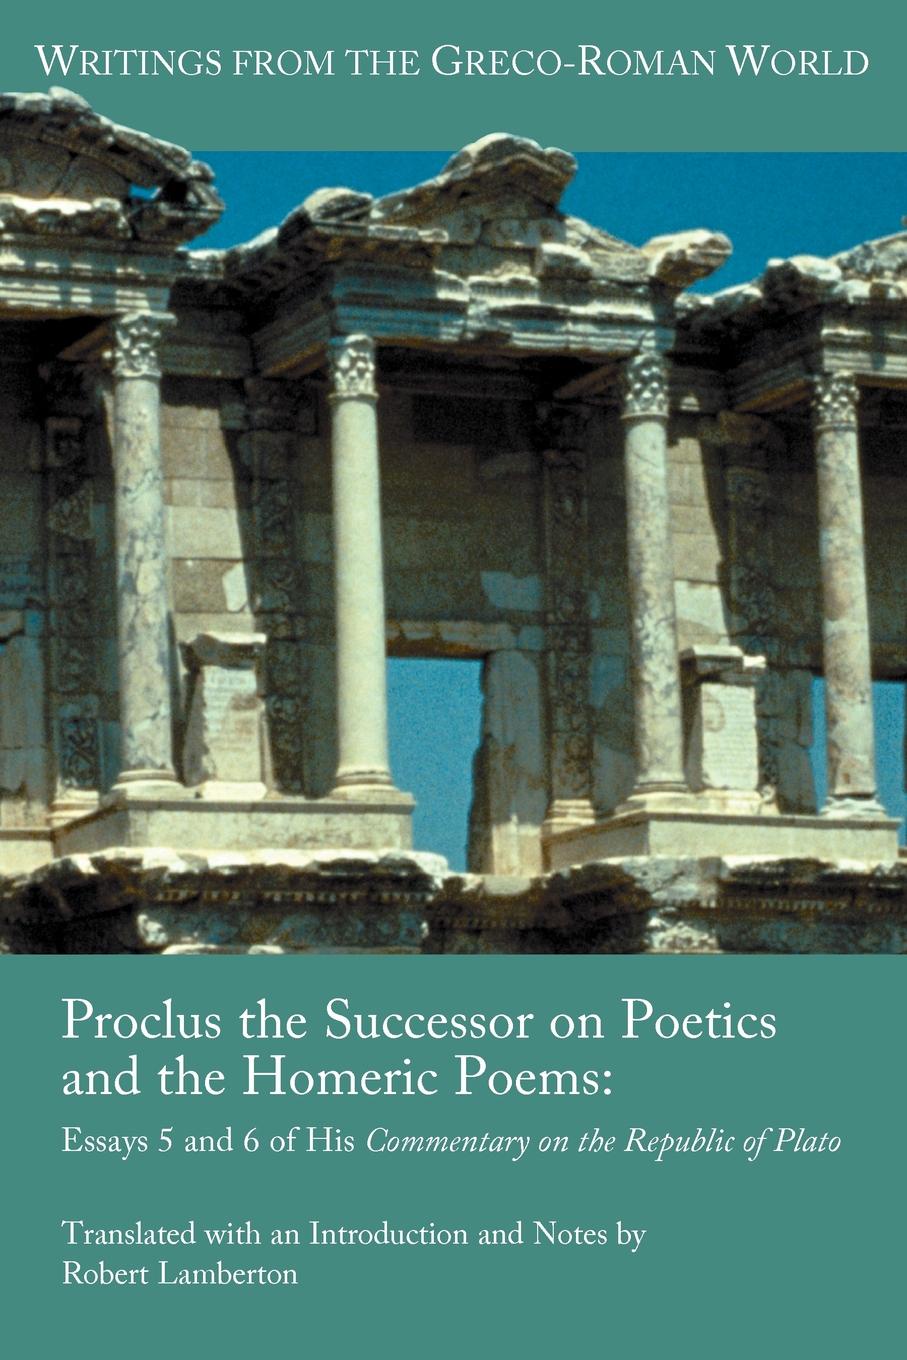 Proclus the Successor on Poetics and the Homeric Poems. Essays 5 and 6 of His Commentary on the Republic of Plato